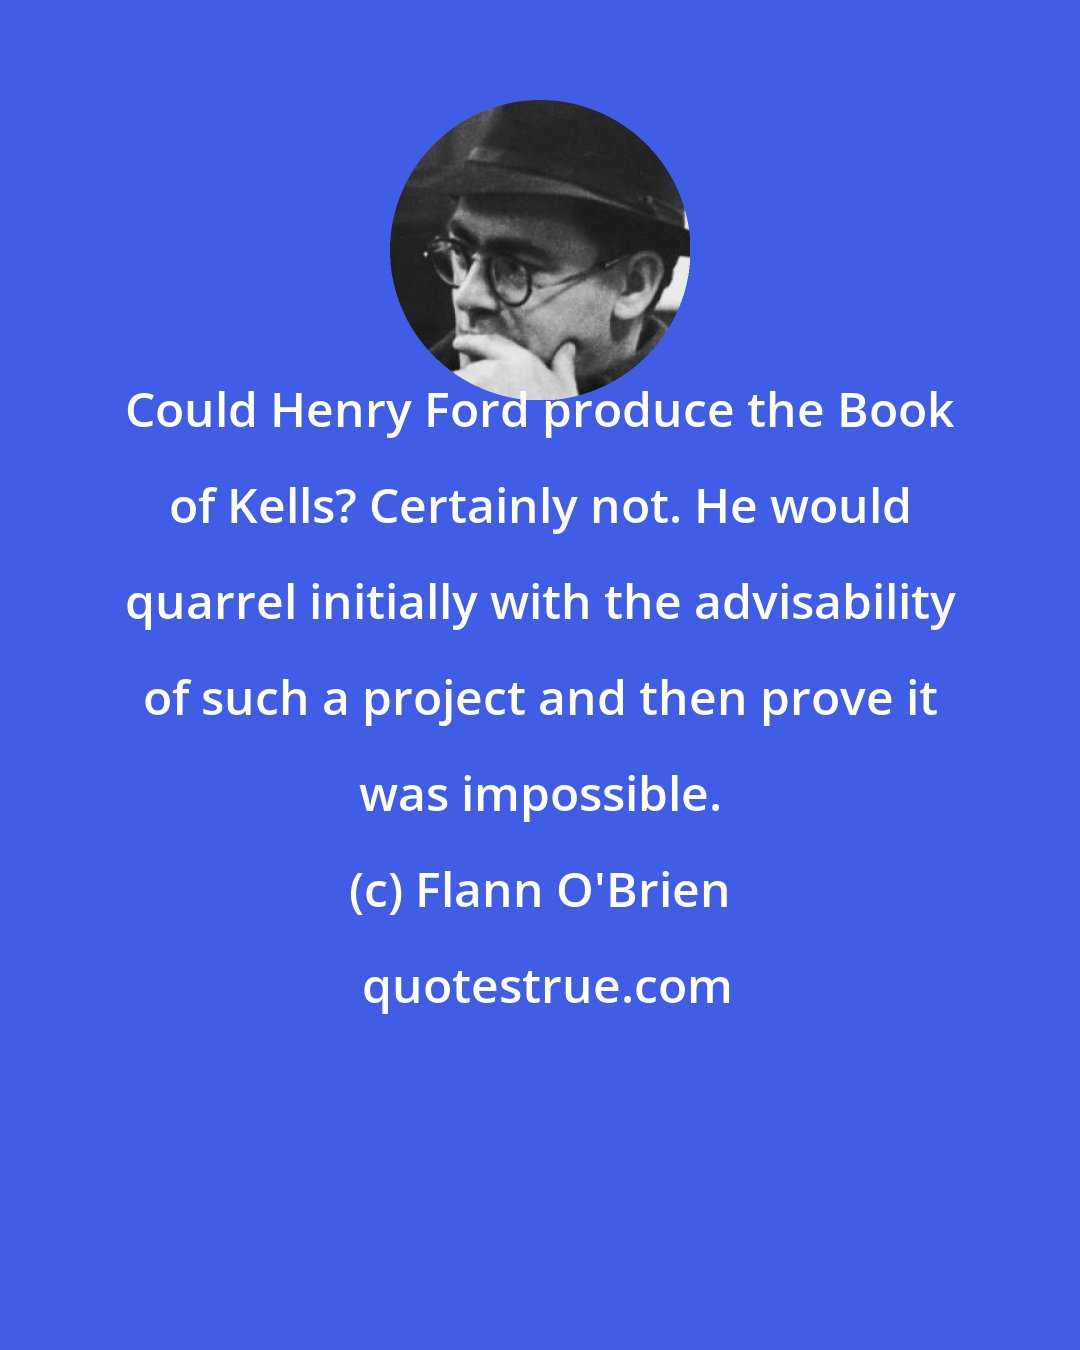 Flann O'Brien: Could Henry Ford produce the Book of Kells? Certainly not. He would quarrel initially with the advisability of such a project and then prove it was impossible.